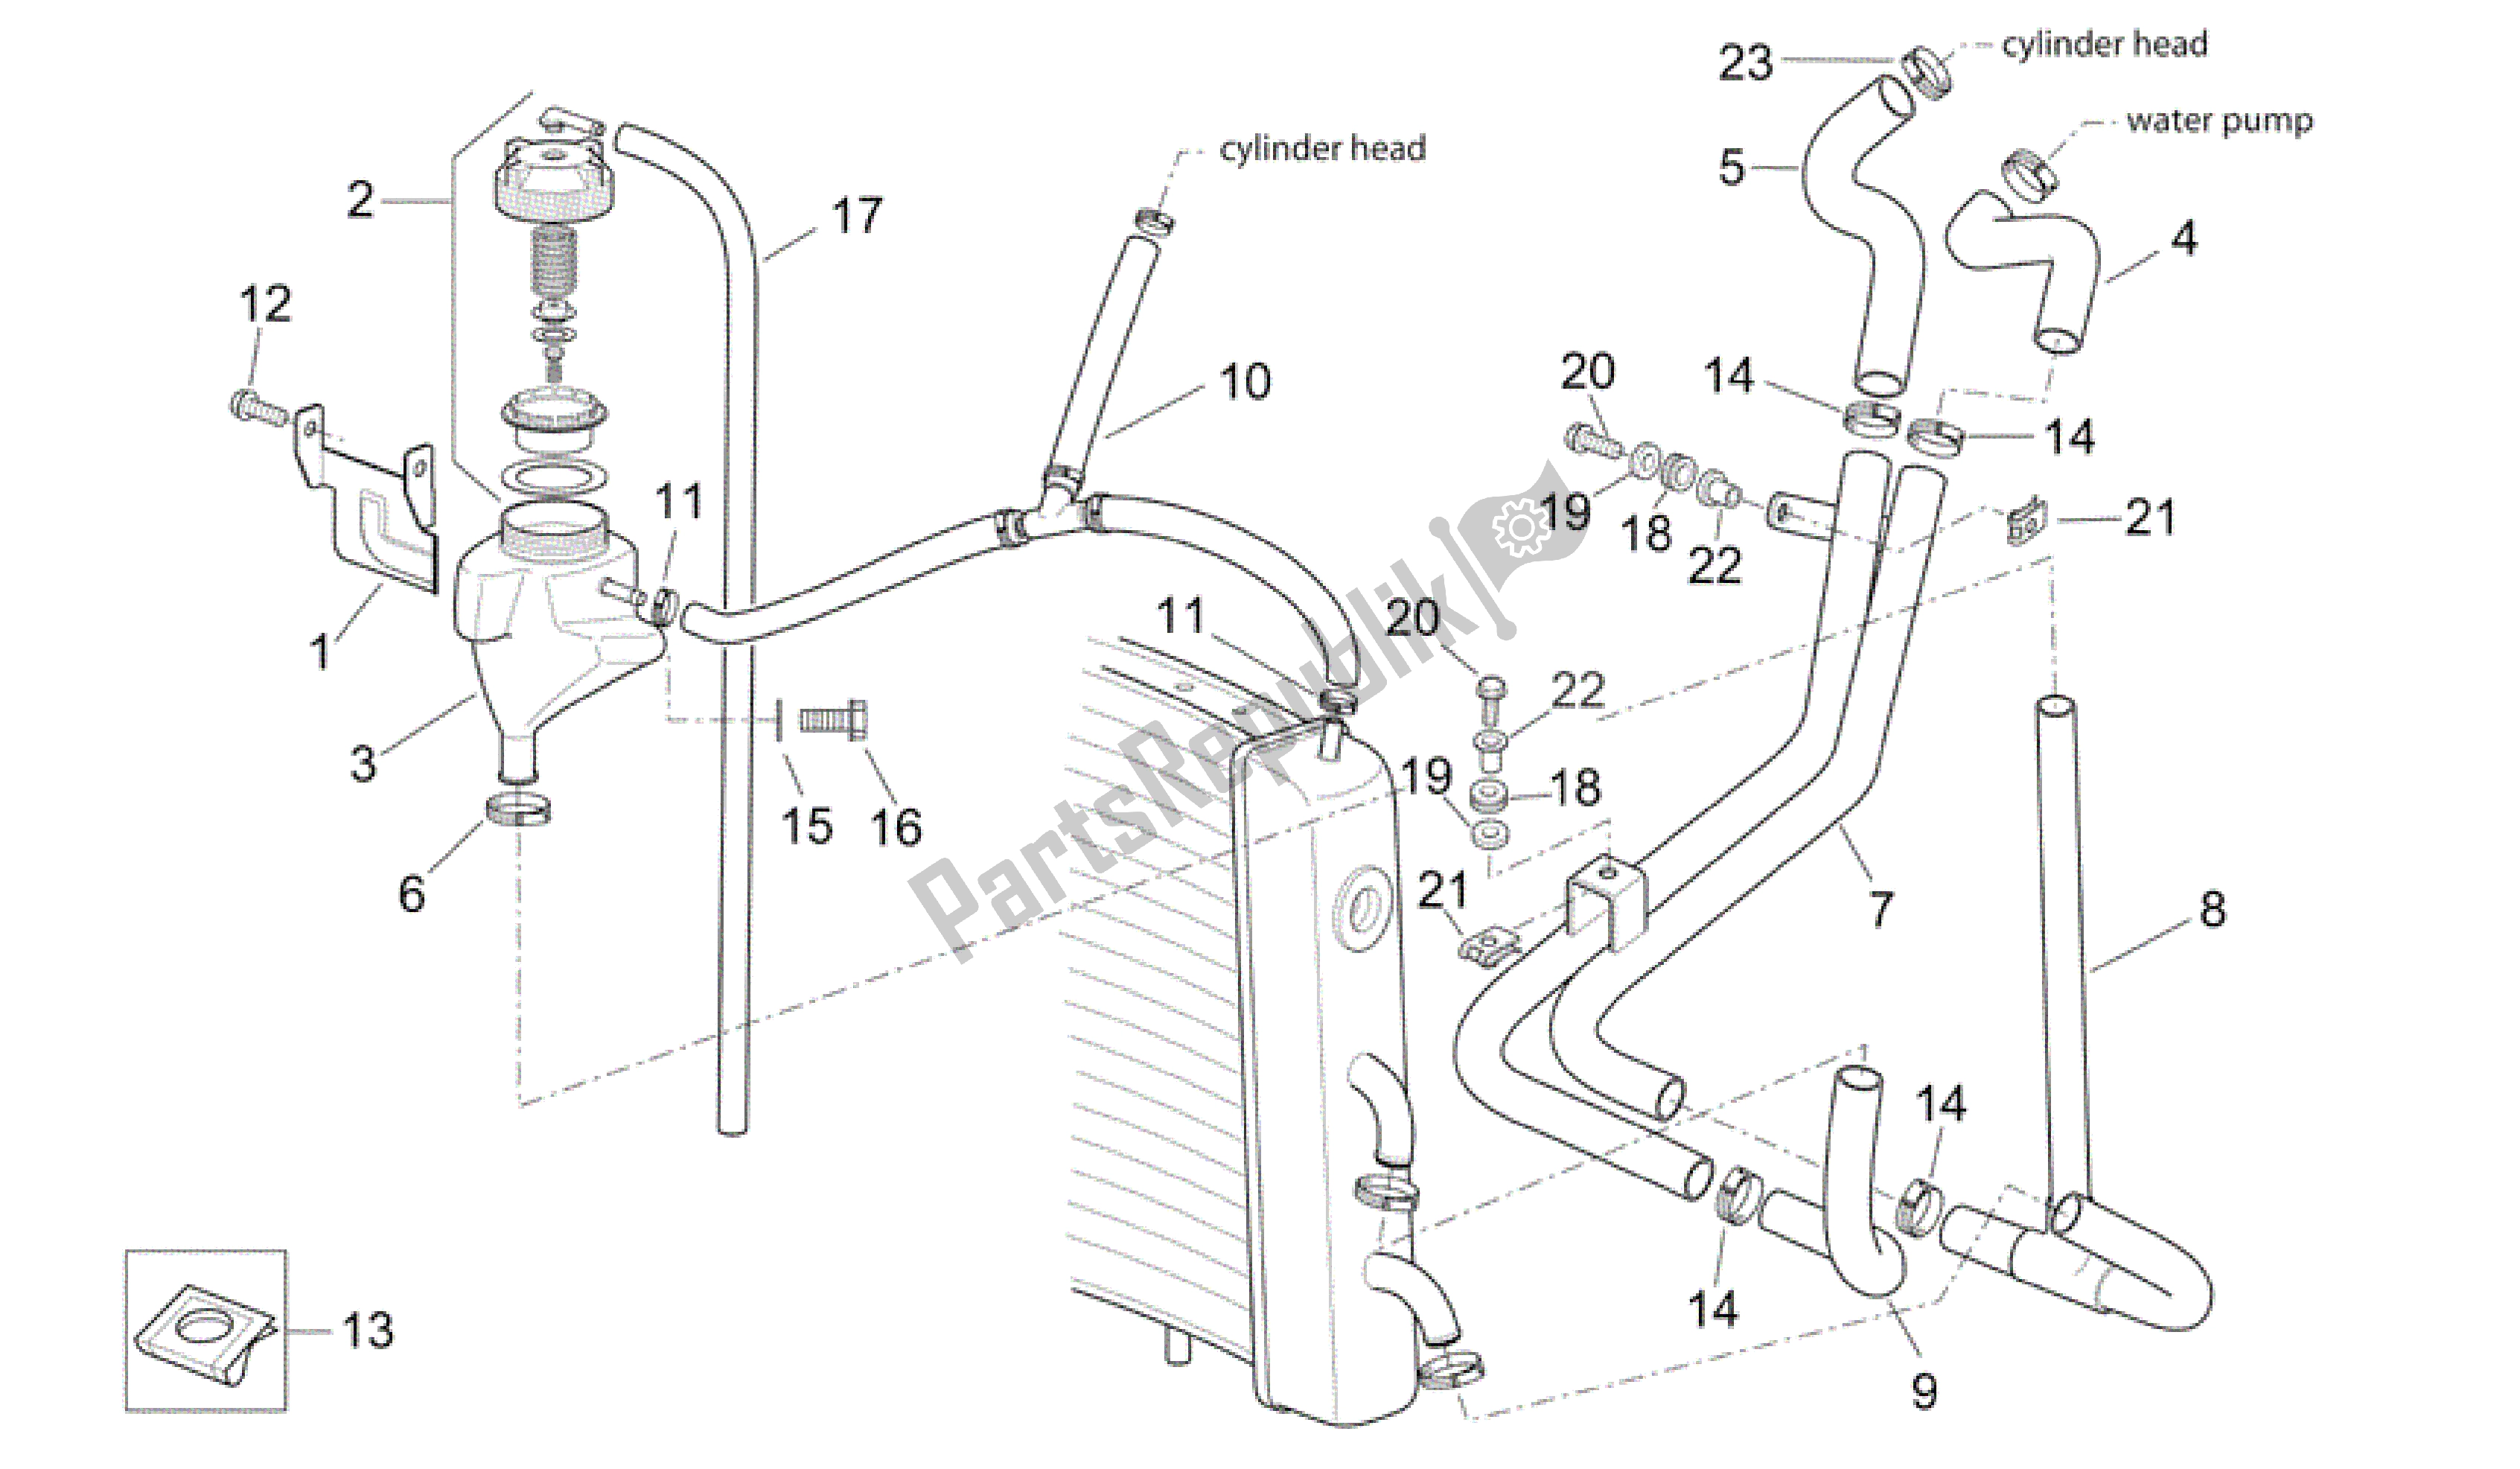 All parts for the Cooling System of the Aprilia Scarabeo 125 2004 - 2006